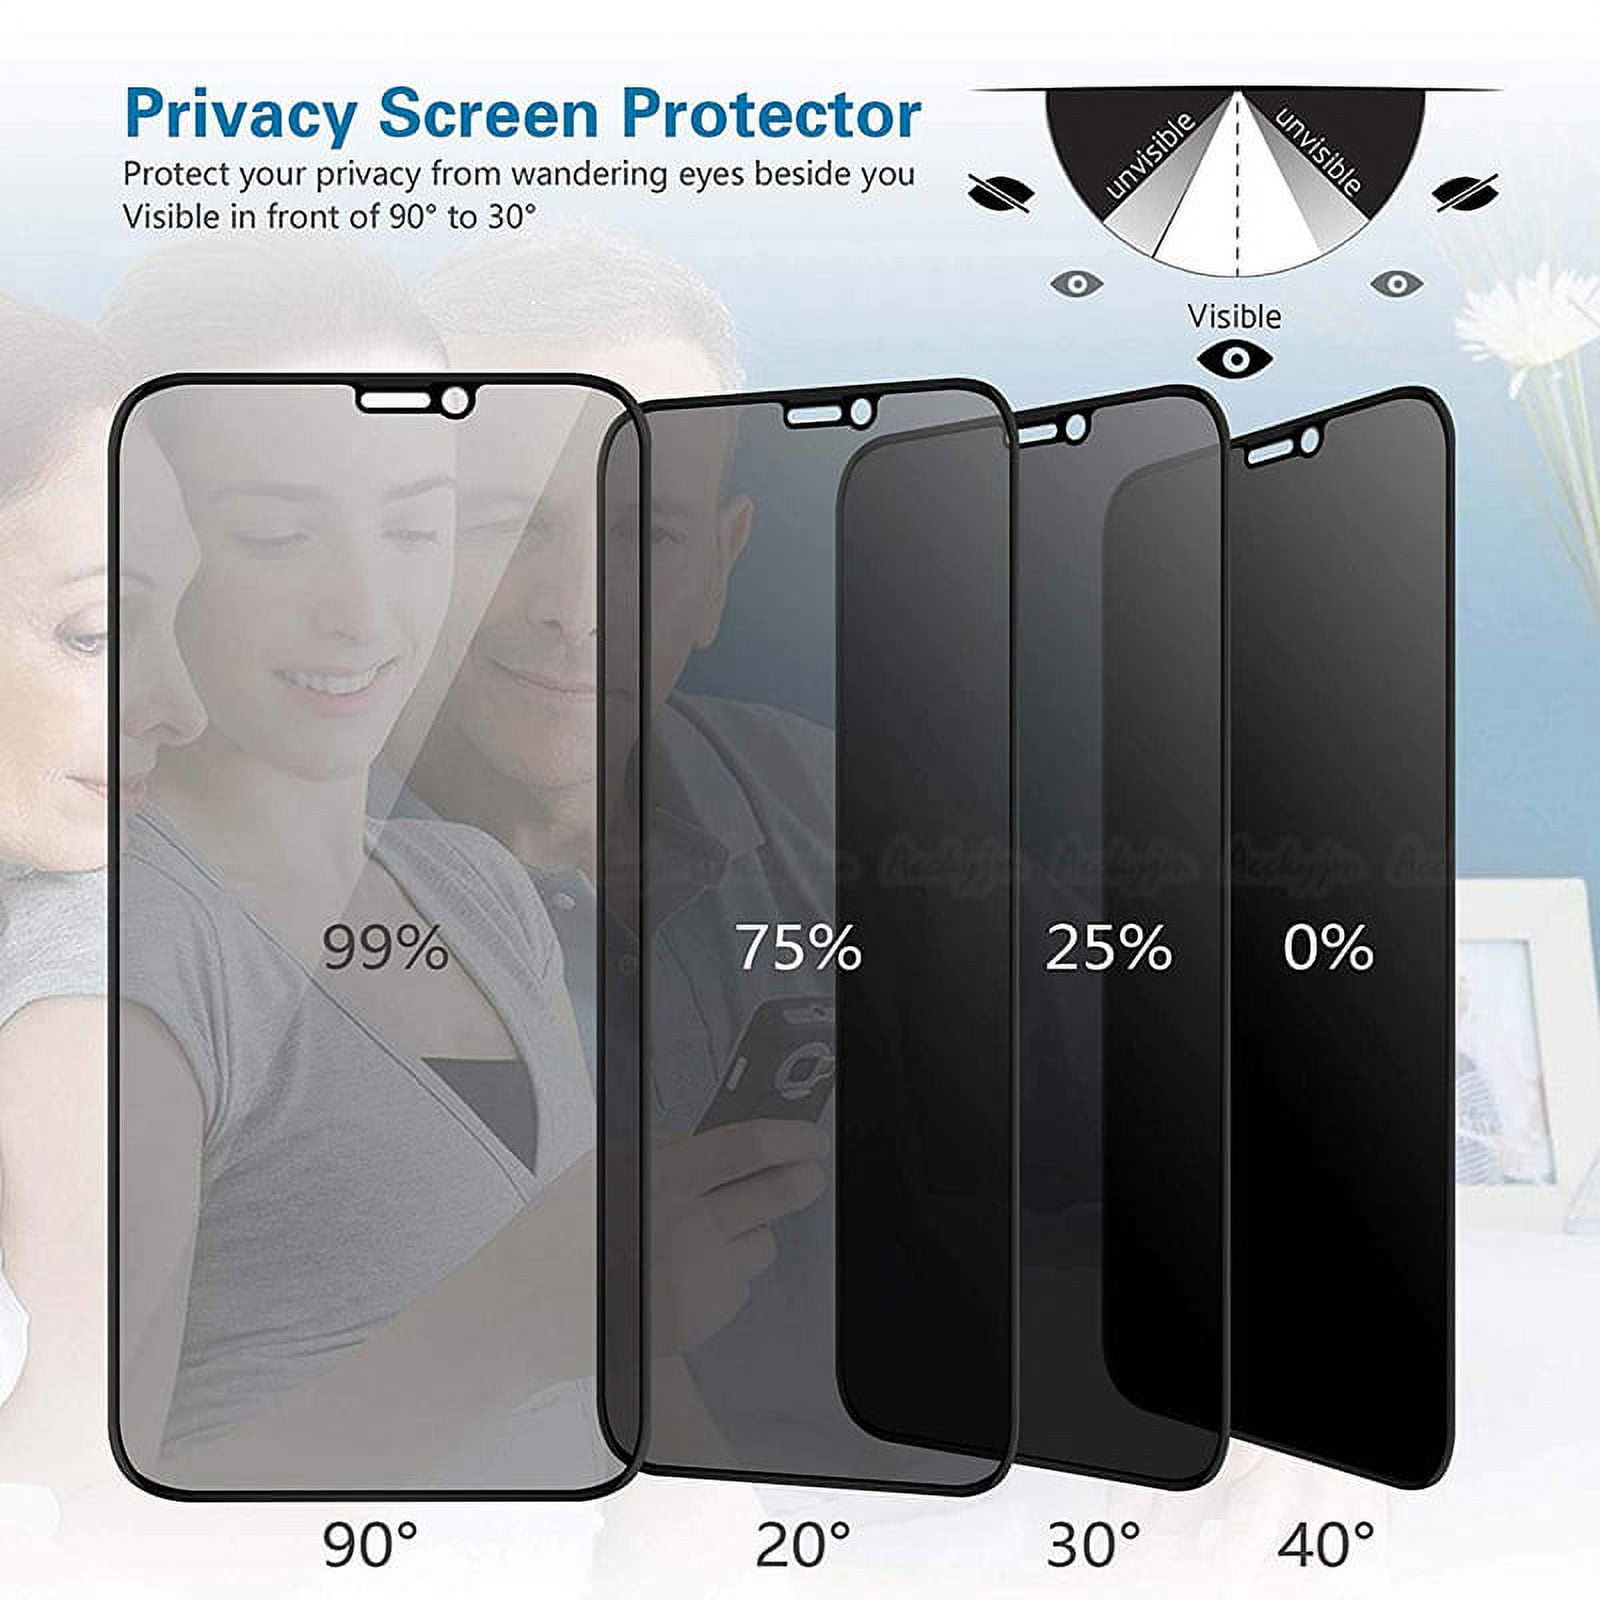 Best Apple iPhone 12 mini Flexible Privacy Screen Protector